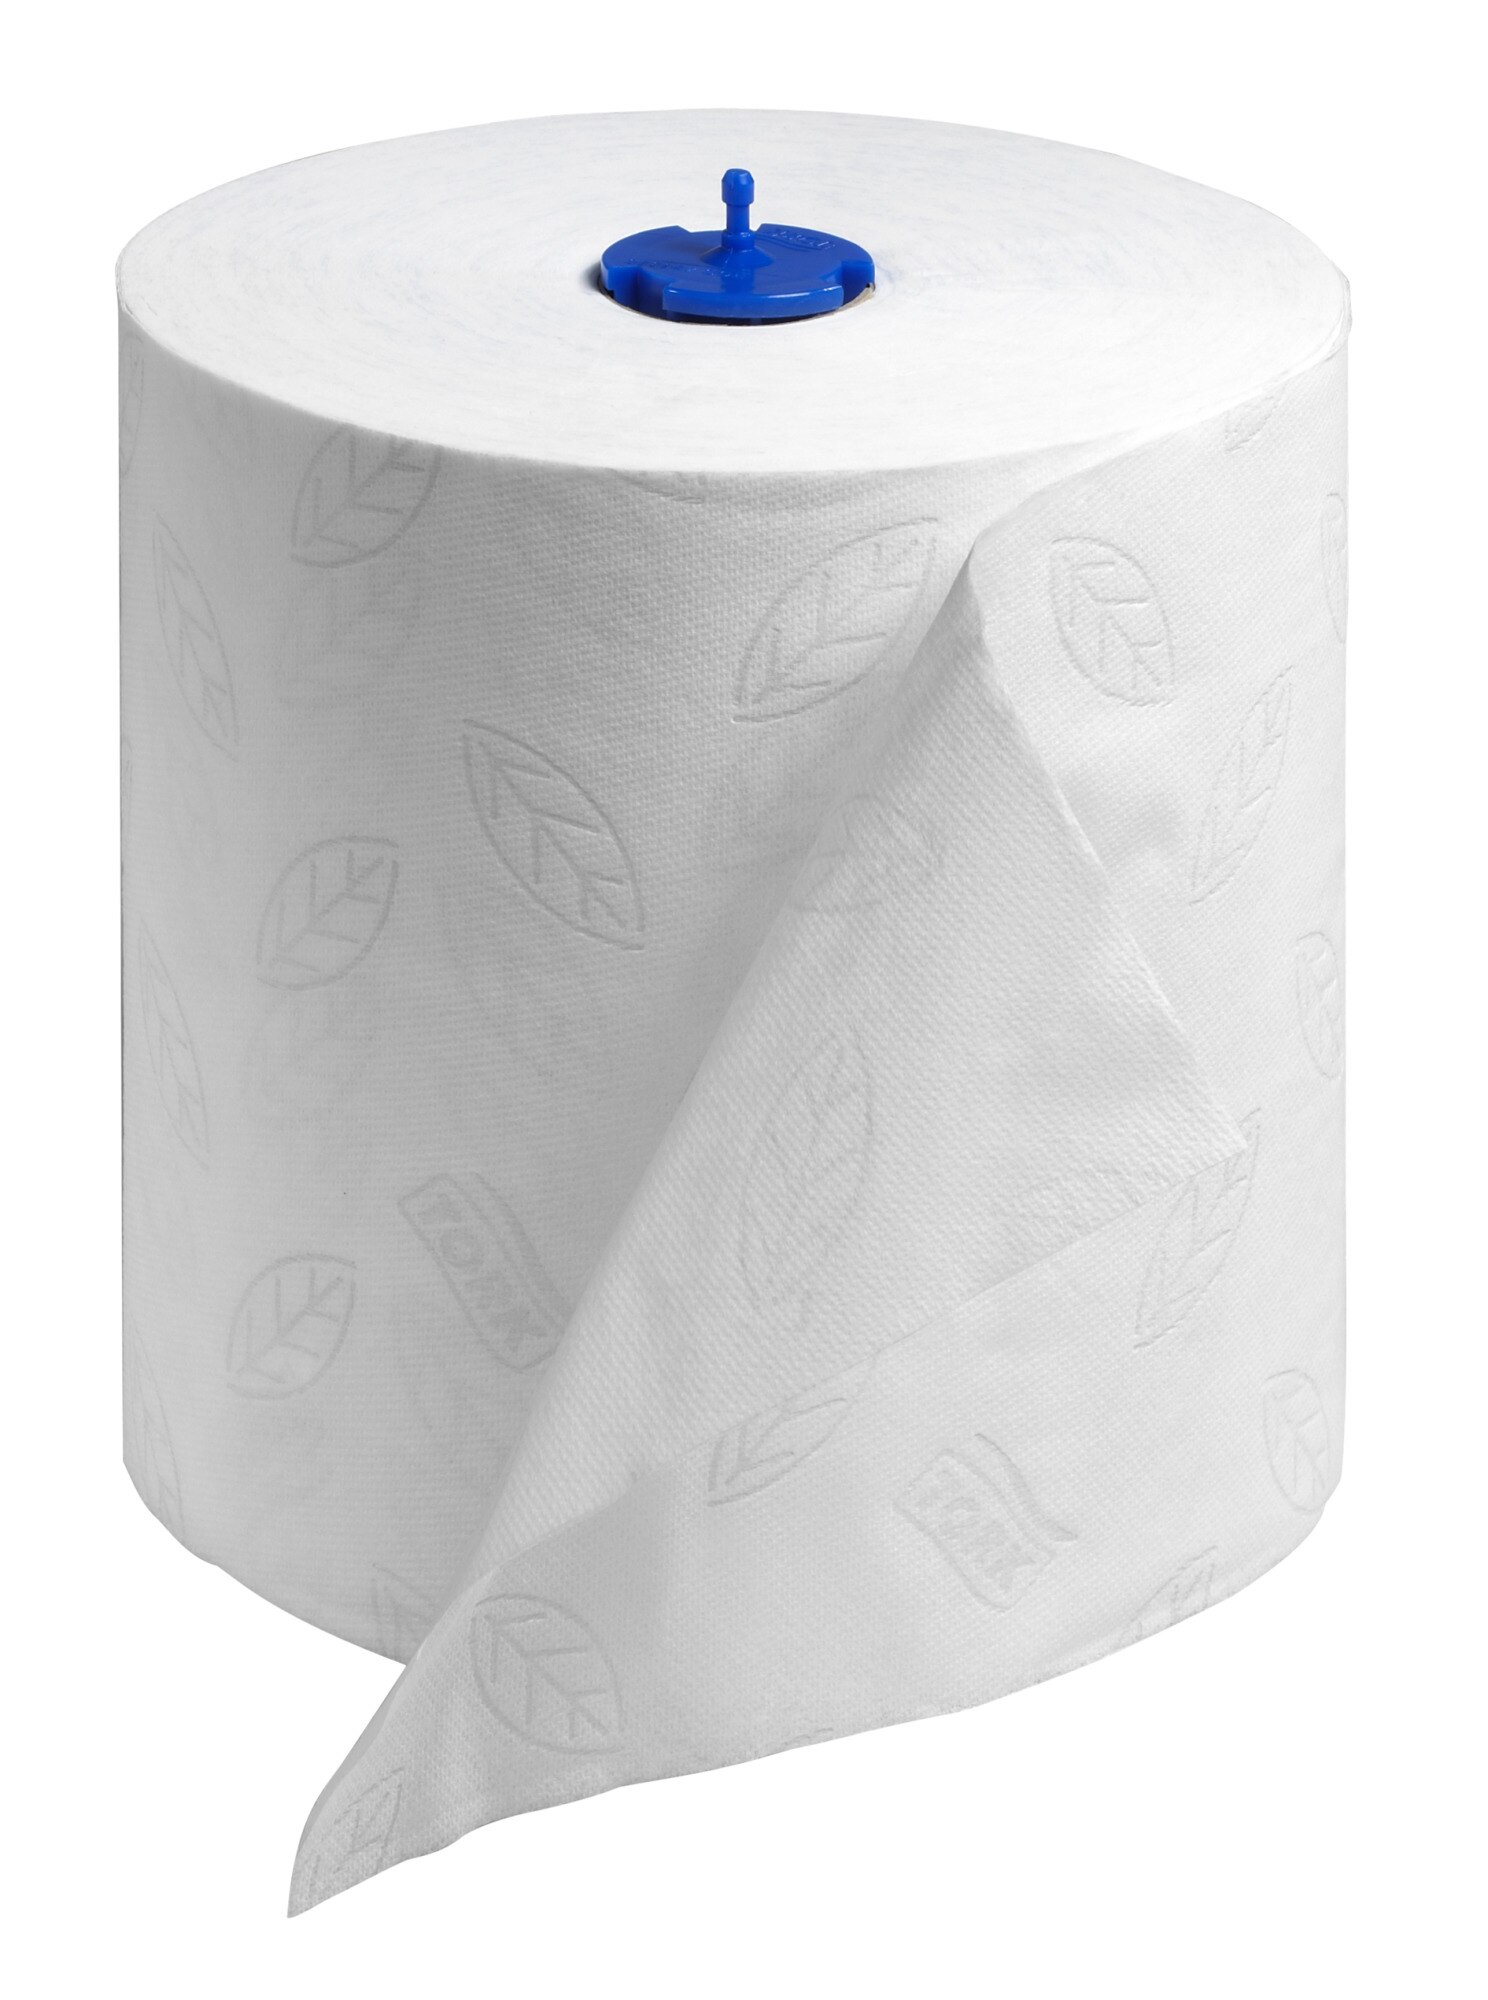 2-Ply Case of 6 Rolls, 575 Feet per Roll, 3,450 Feet 8.27 Width x 575 Length Tork 290019 Premium Soft Matic Paper Hand Towel Roll White with Blue Leaf Print 